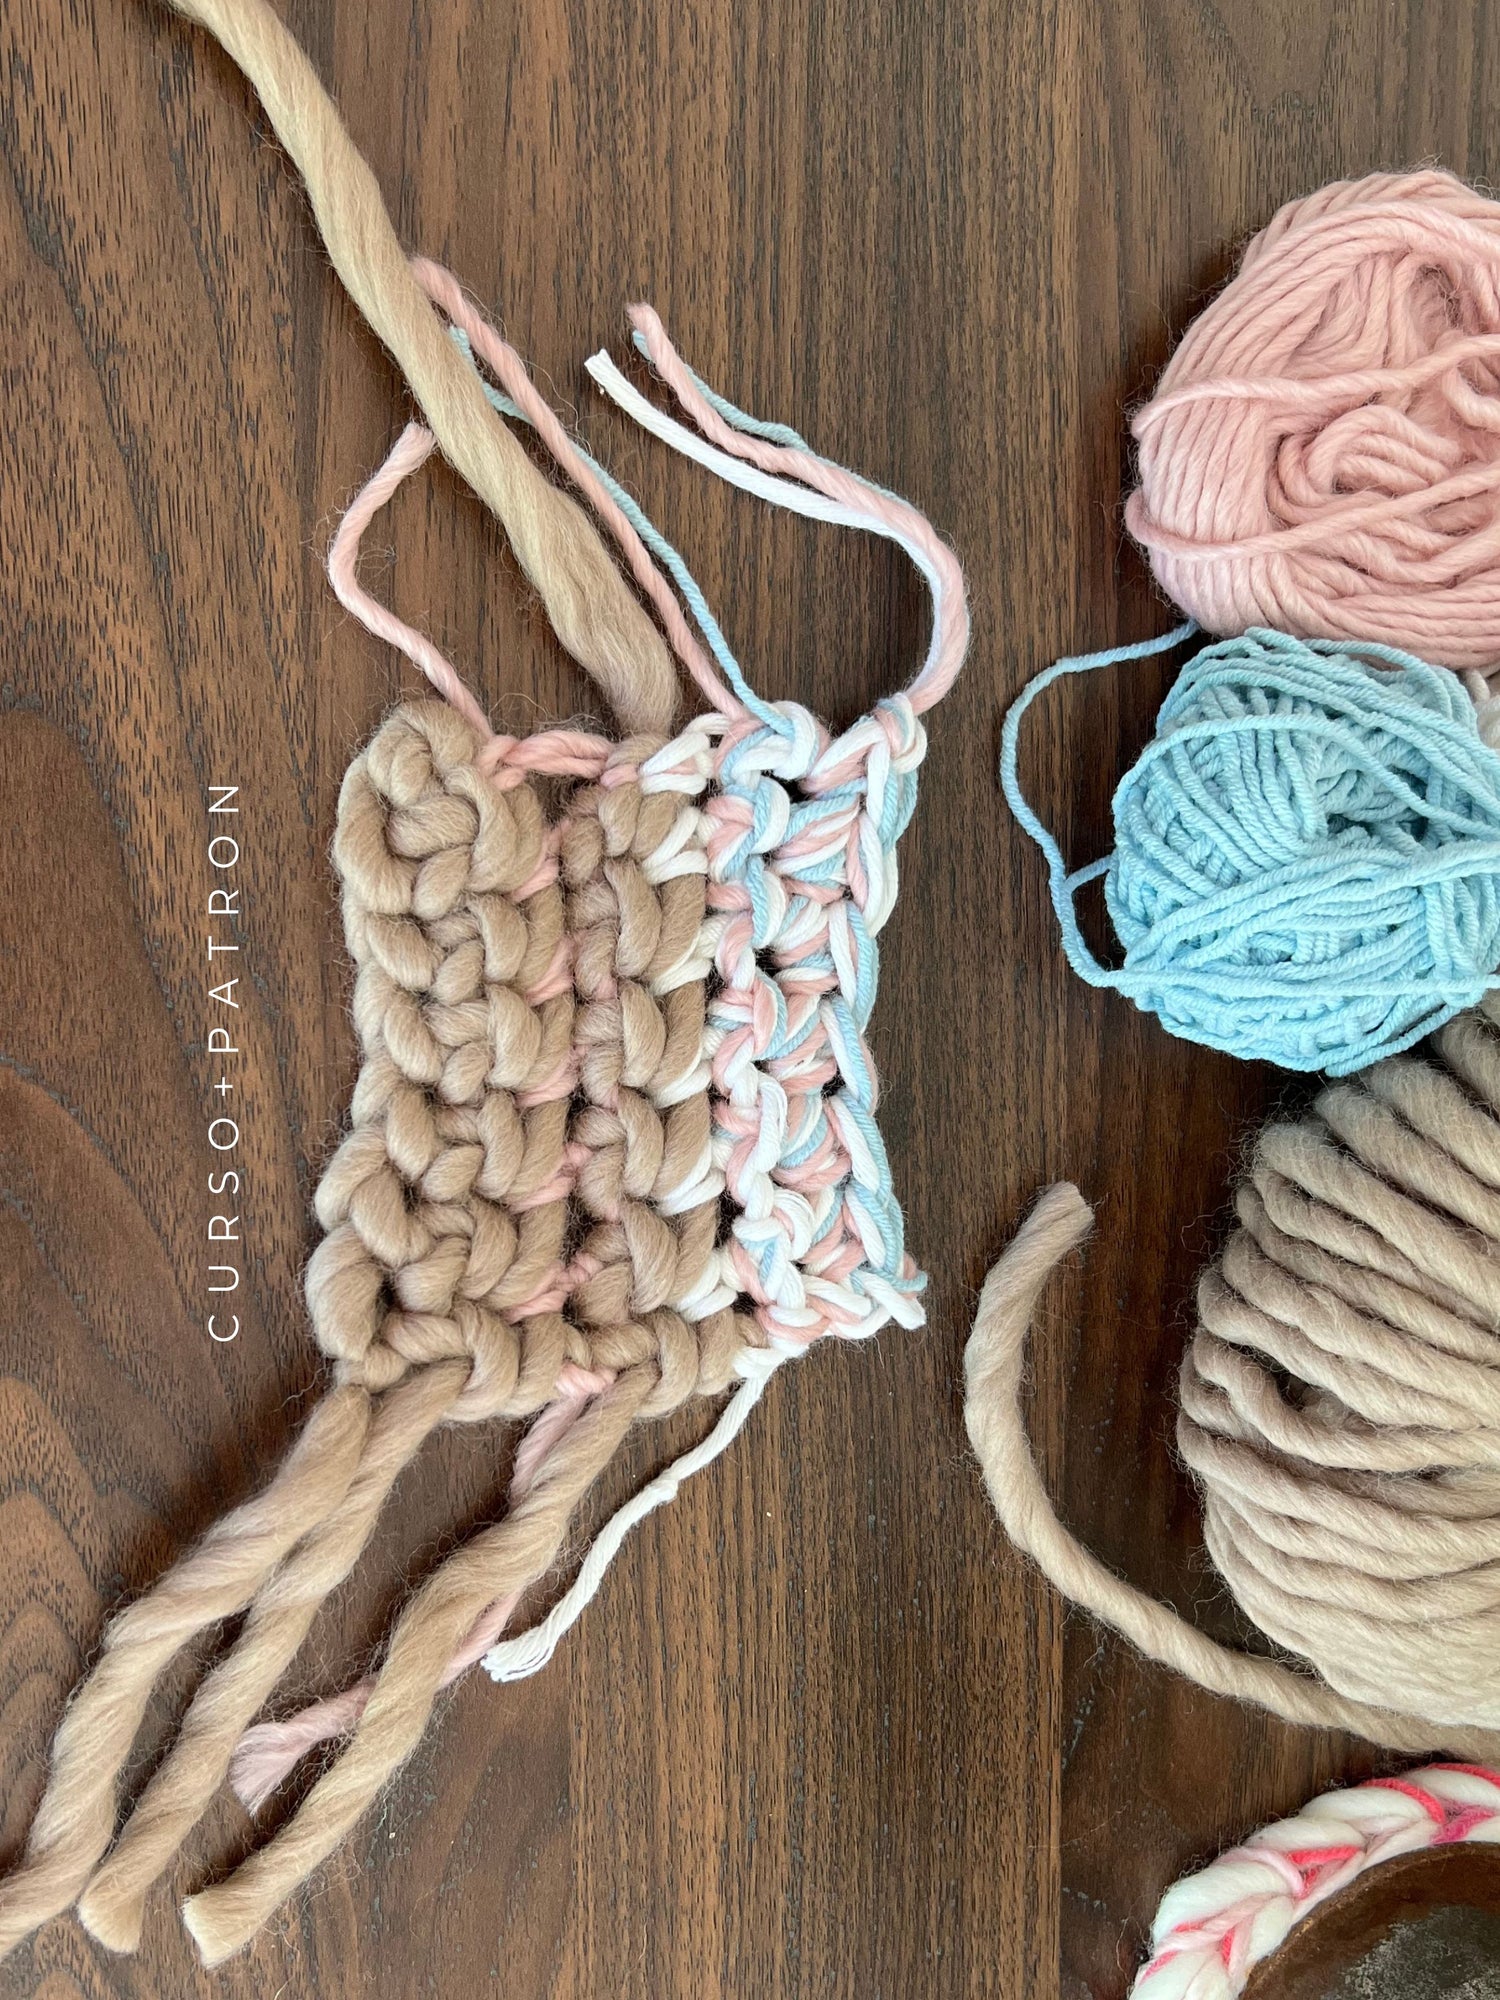 Online course: introduction to crochet